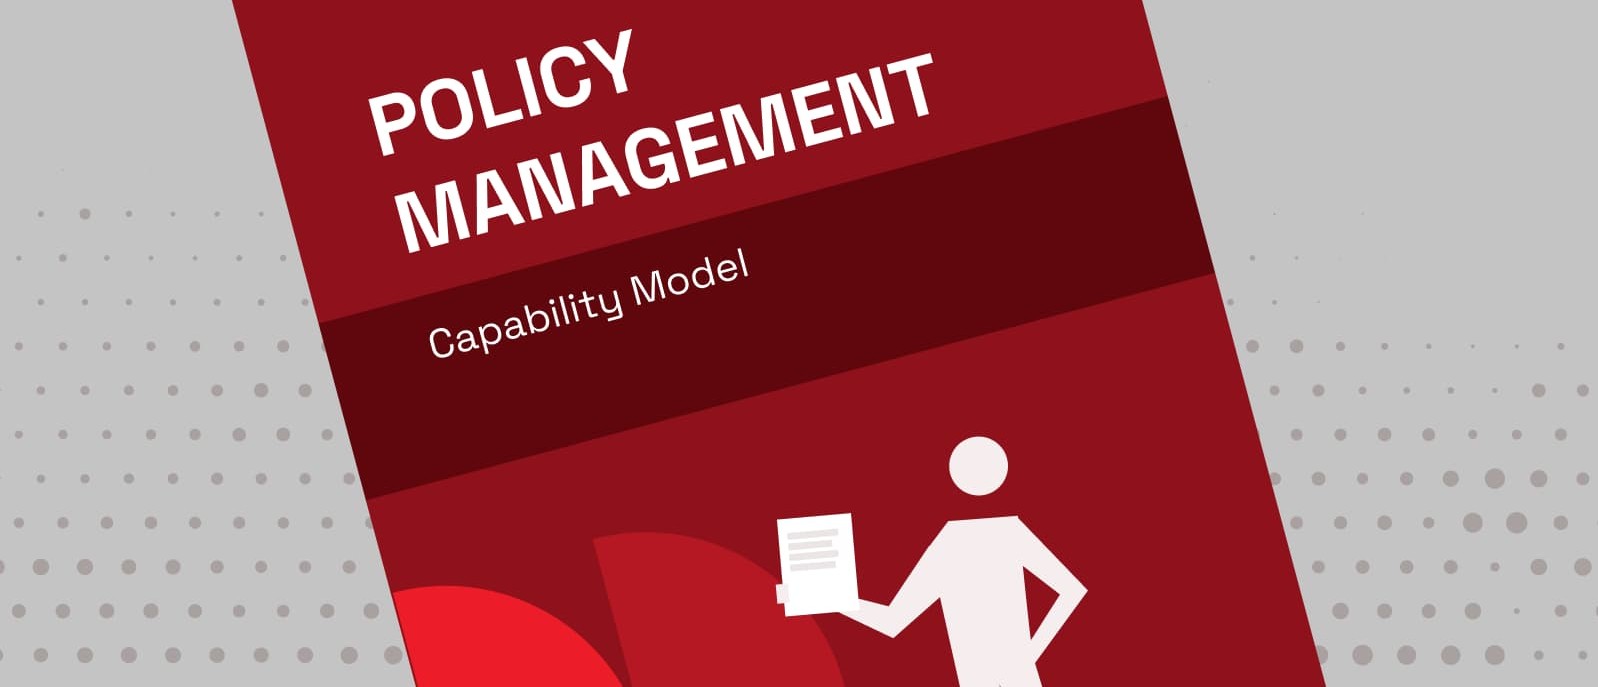 Policy Management Capability Model